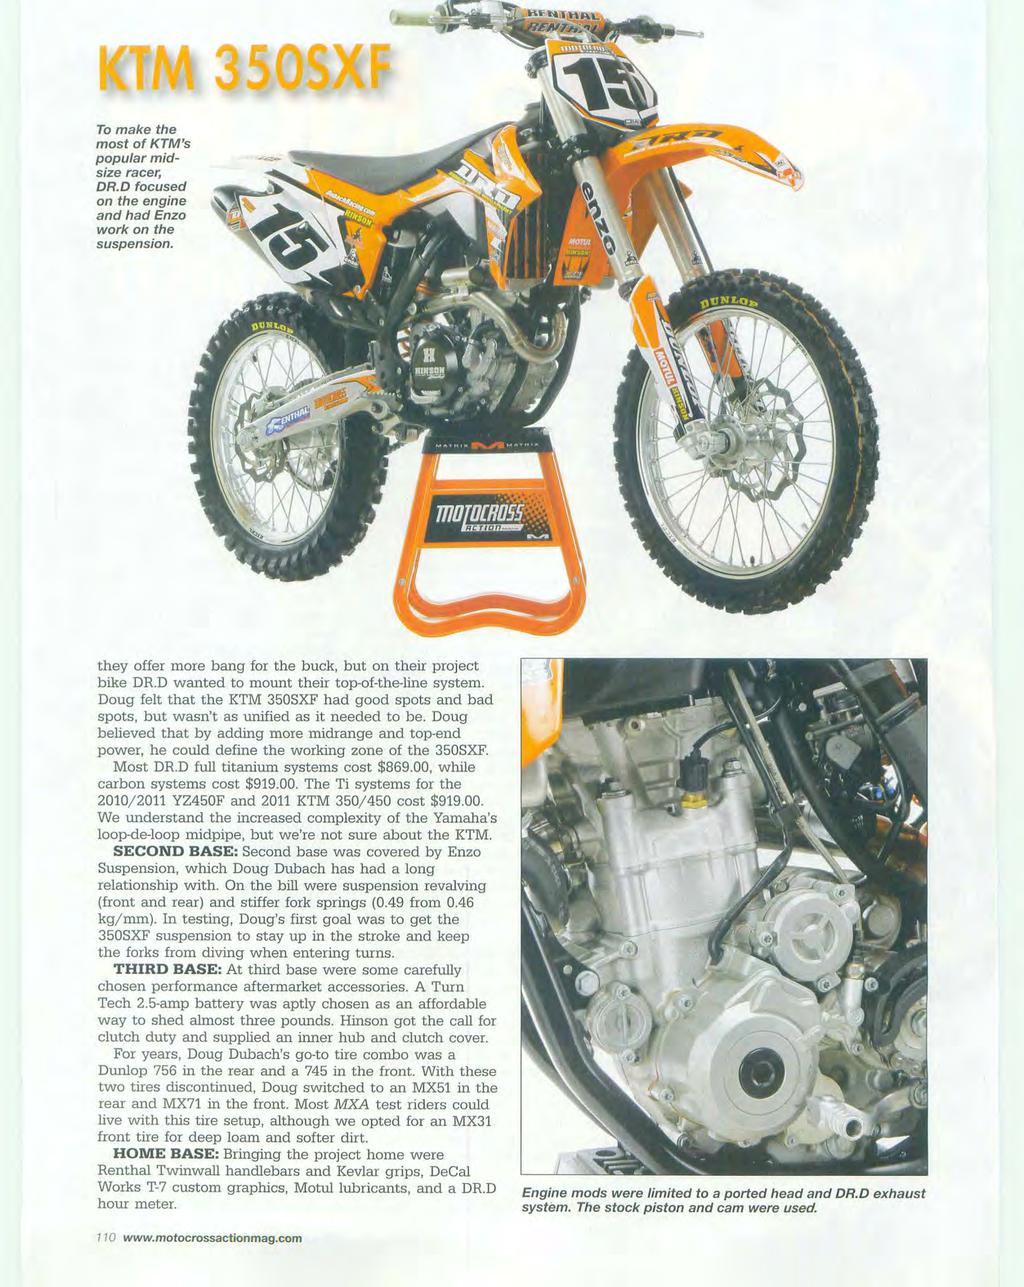 To make the most of KTM's popular midsize racer, DR.D focused on the engine and had Enzo work on the suspension.